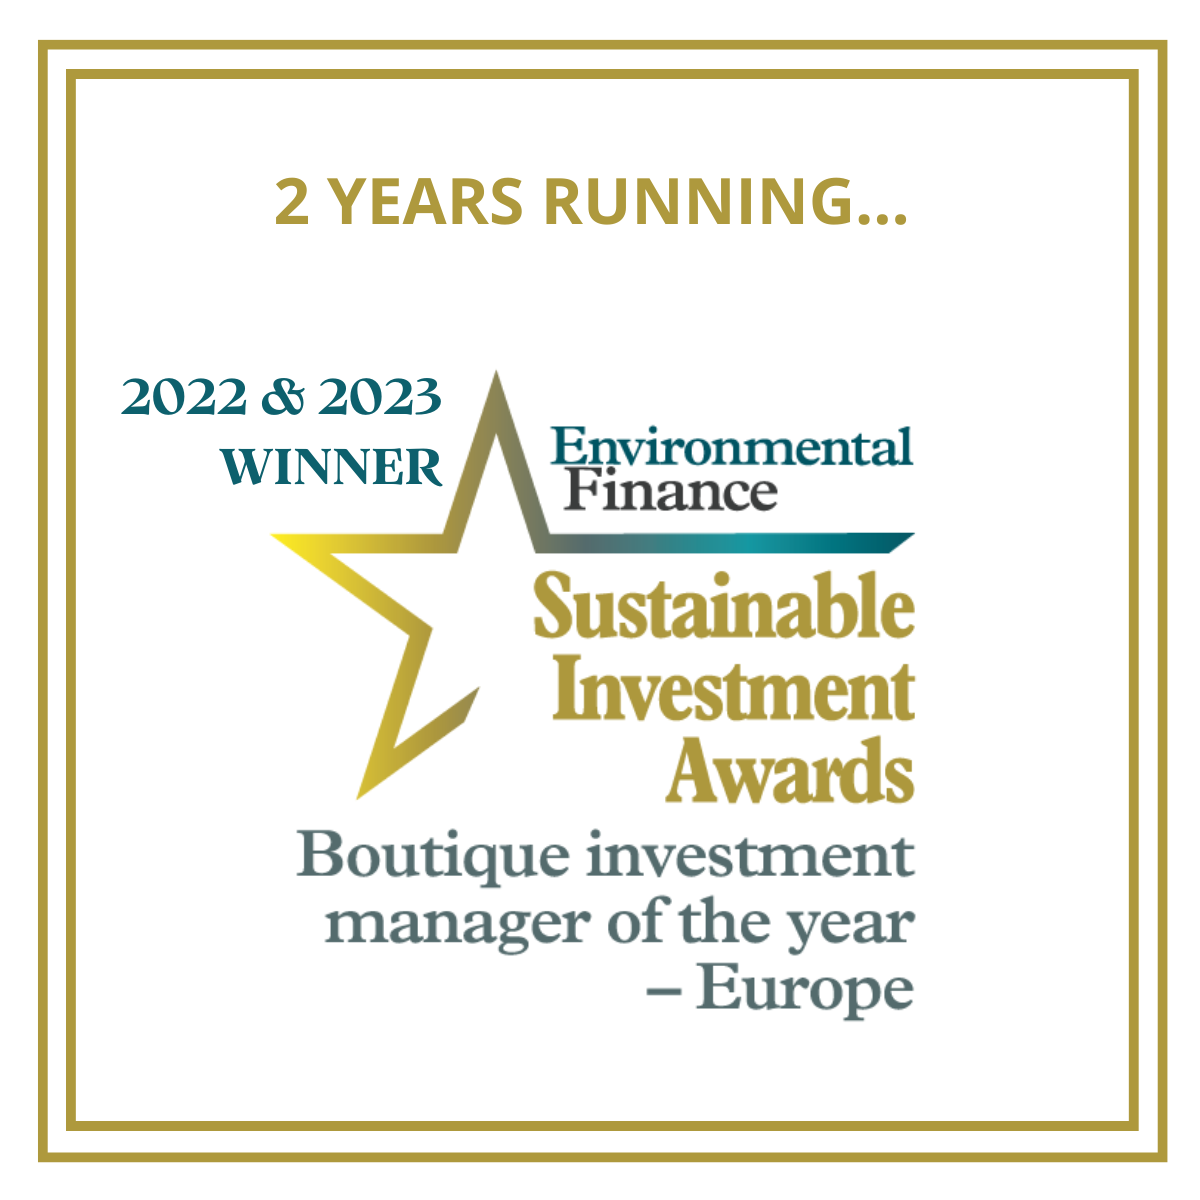 2023 Boutique investment manager of the year, Europe: Osmosis Investment Management